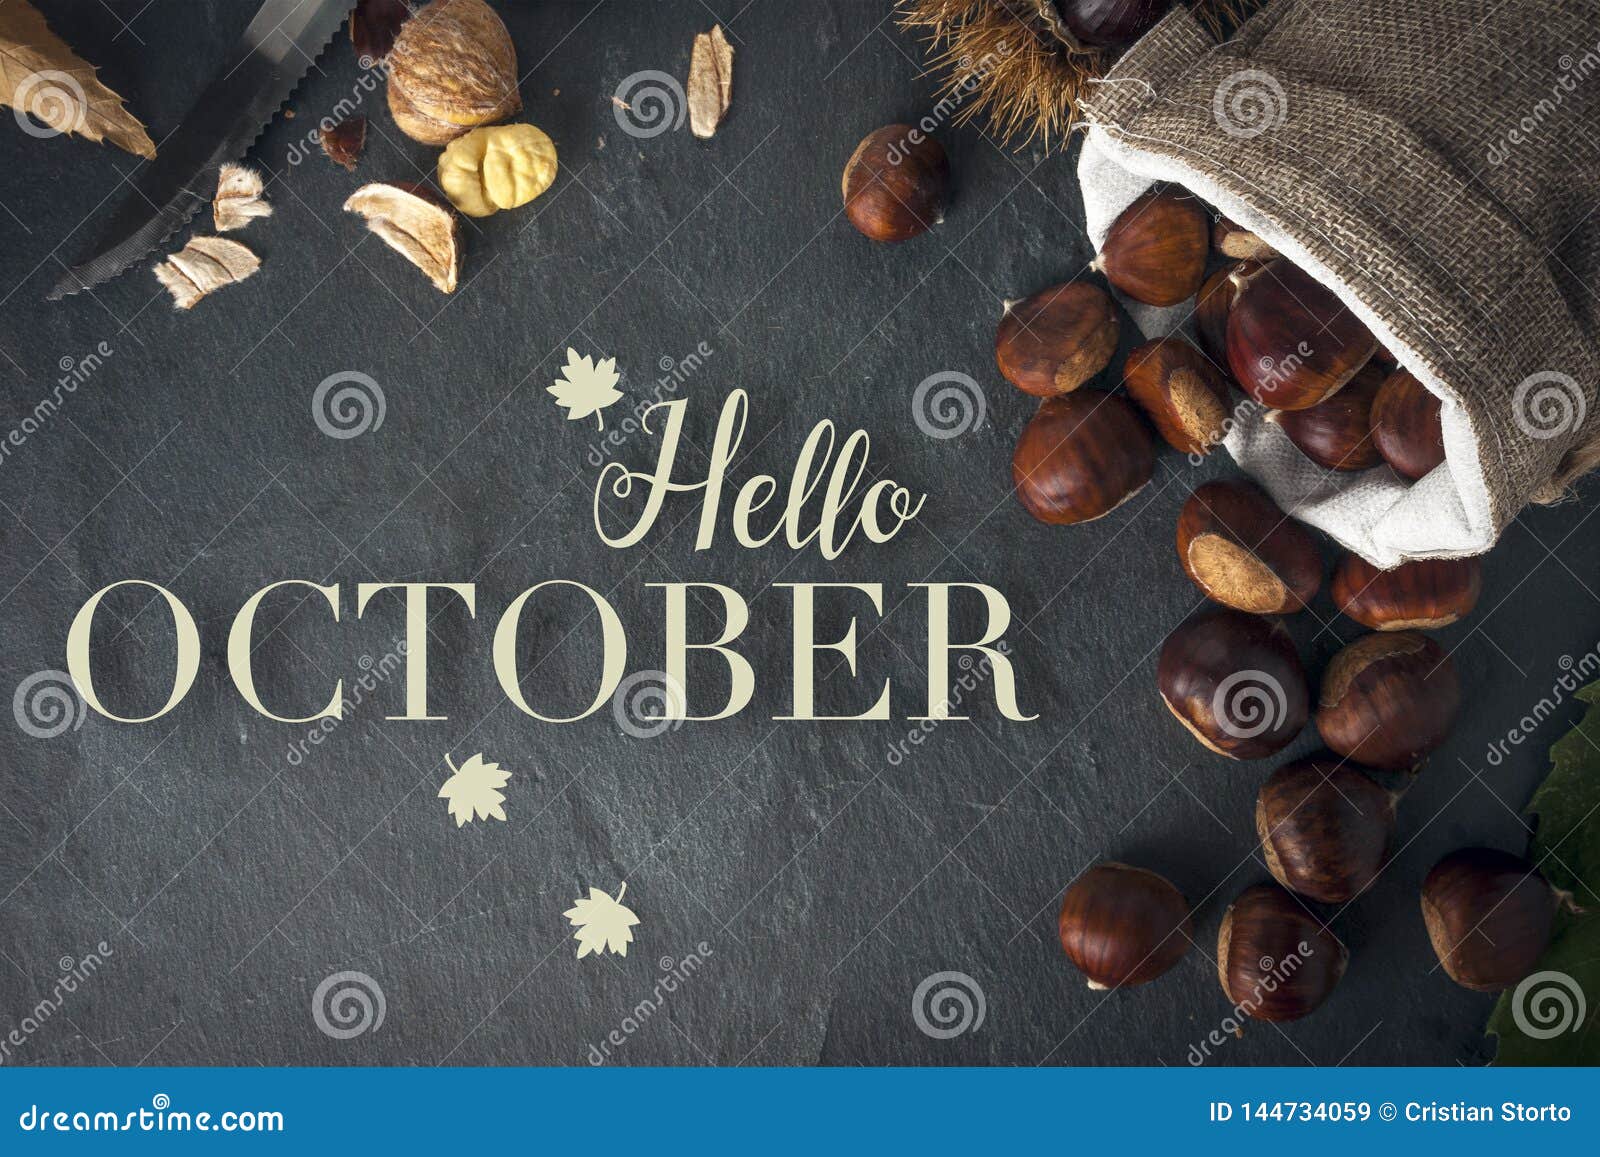 hello october card. roasted chestnuts on a rock table